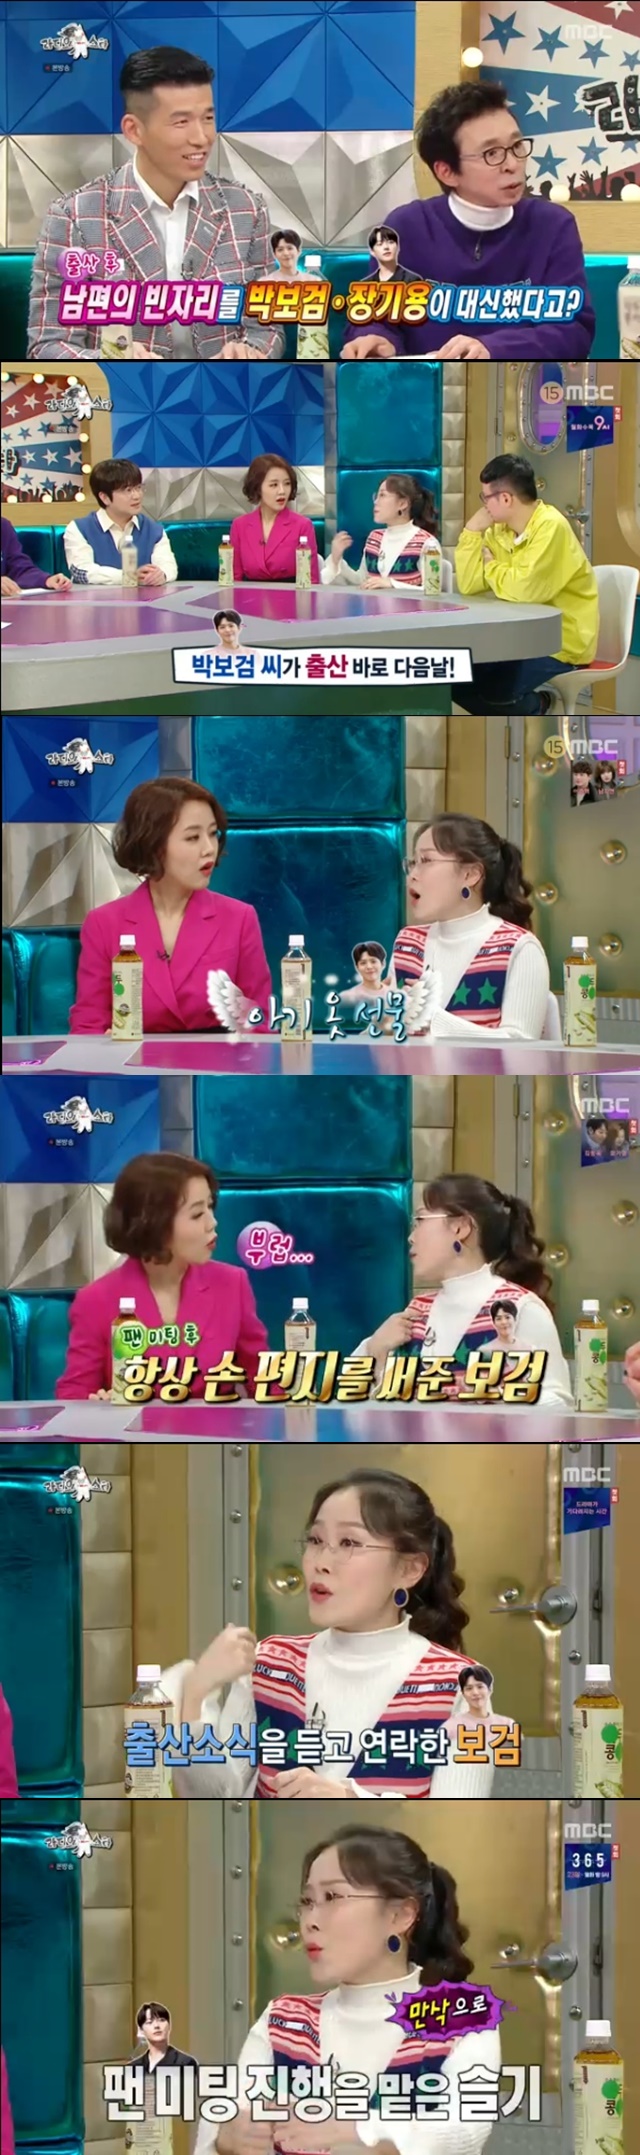 Park Seul-gi has confessed to Park Bo-gum Mitam.MBC Radio Star, which was broadcast on March 11, featured Park Hyun-bin, Lee Ha-jung, Park Seul-gi and Cho Jung-chi while featured in Parents Is the First.Park Seul-gi said, Park Bo-gum sent a gift to Child Birth the next day, Quick, and sent her baby clothes and her calendar.I had a relationship with Park Bo-gum, who had a fan meeting MC, and he wrote a hand letter every time he had a fan meeting, he said.Mr. Park Bo-gum didnt know my Child Birth date. I think he saw it as an article.If you were Park Bo-gum, you would be, he said, adding that he had contacted him.Choi Seung-hye